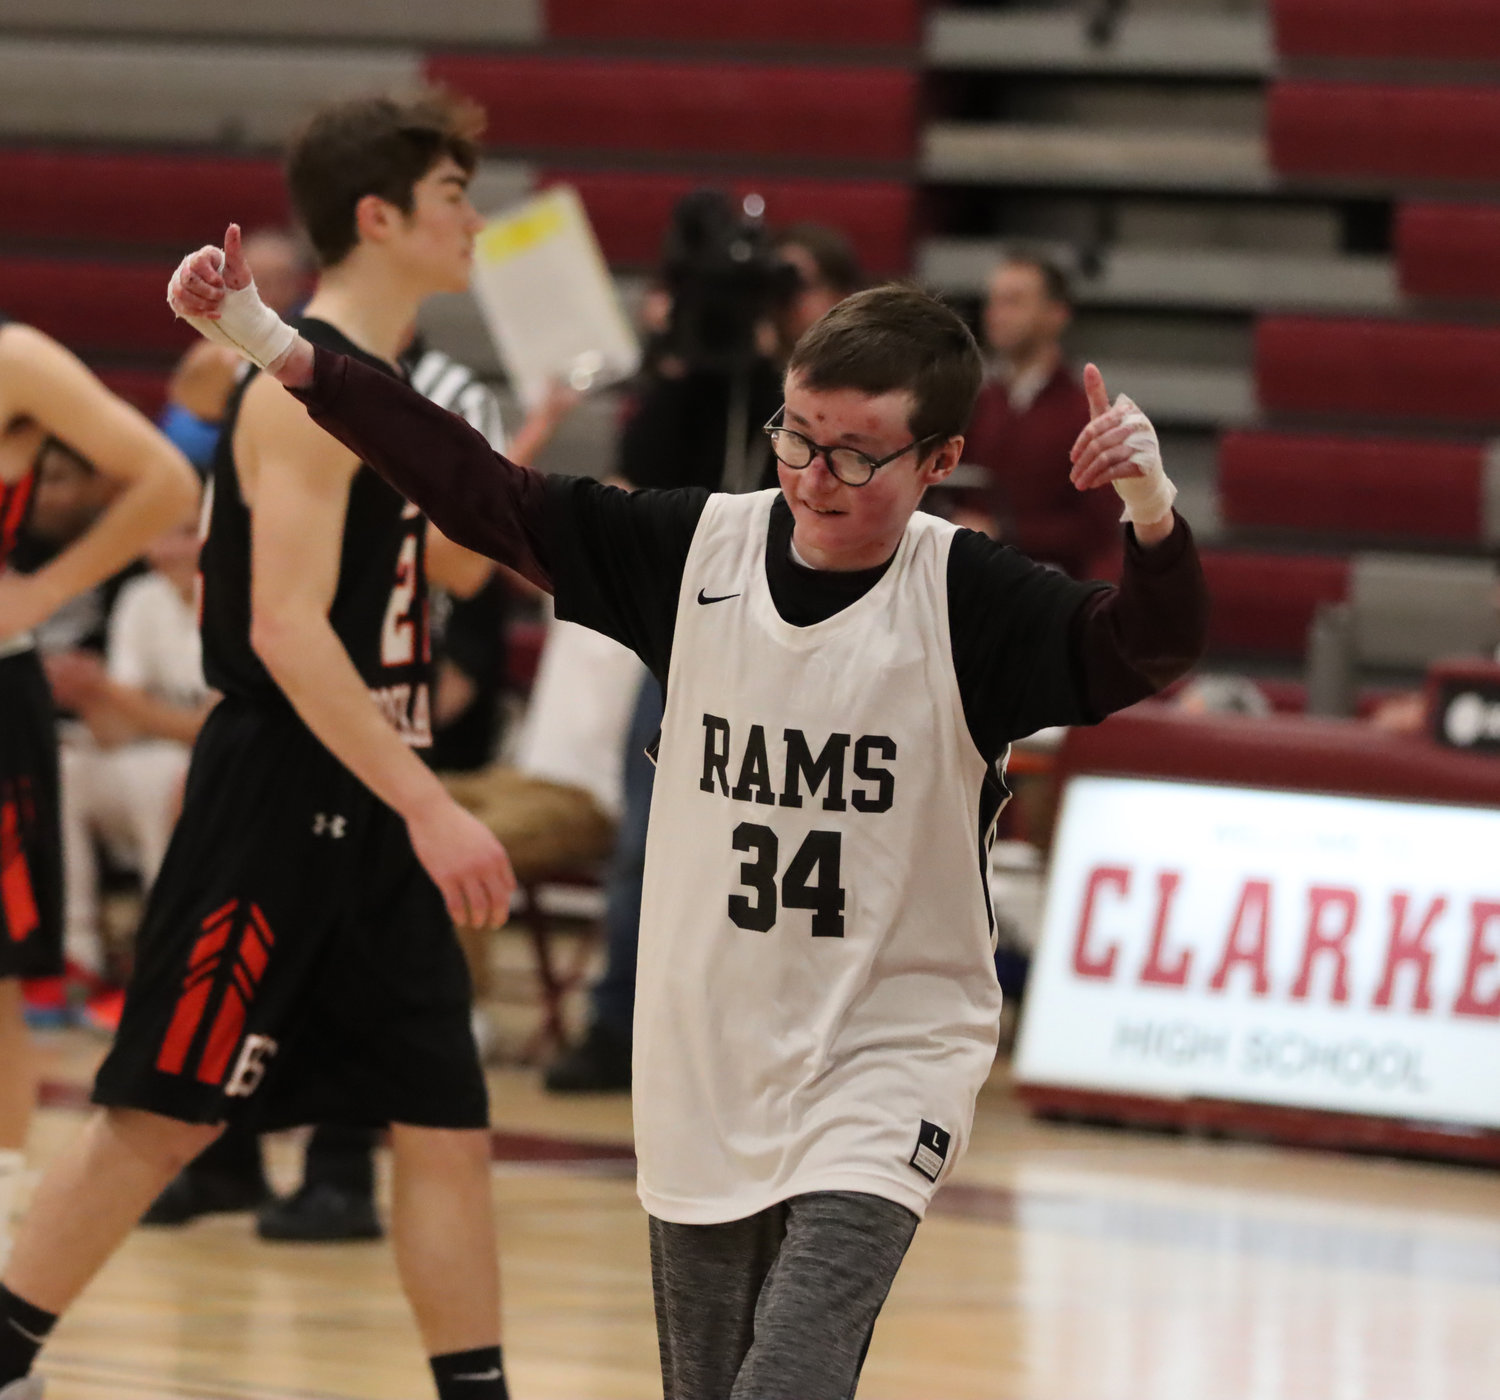 Robbie Twible ran onto the court when W.T. Clarke High School faced off against East Rockaway High School last Friday. The 17-year-old watches the games from the sidelines because he has a life-threatening skin disorder, but this time he shot, and scored.